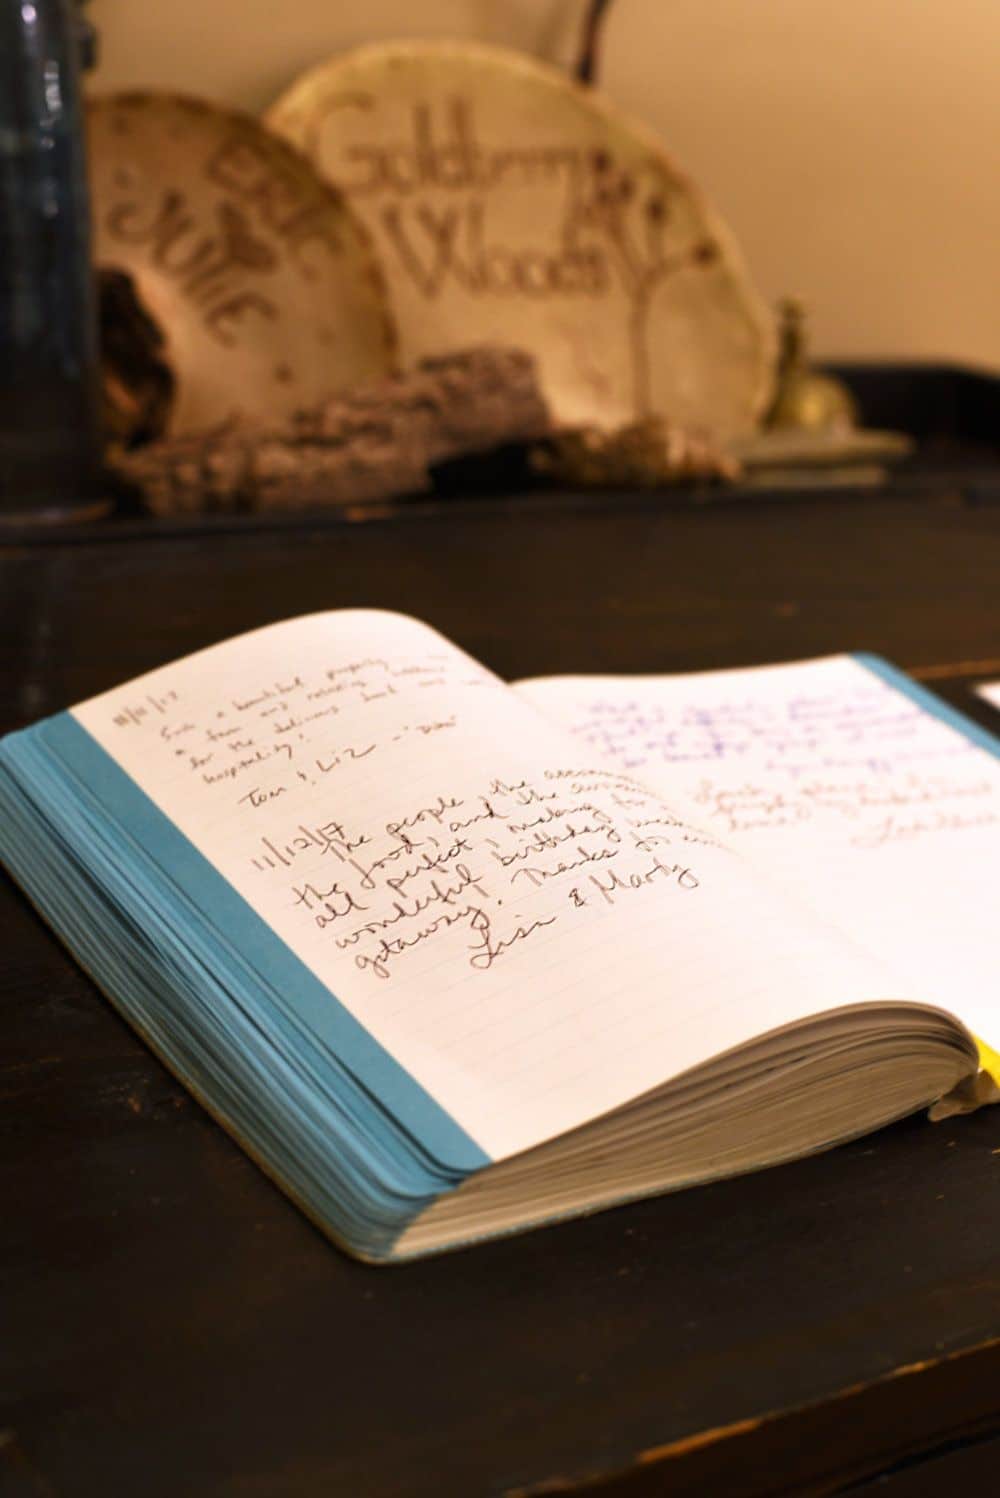 Messages from previous guests are left in the notebook that is pictured.